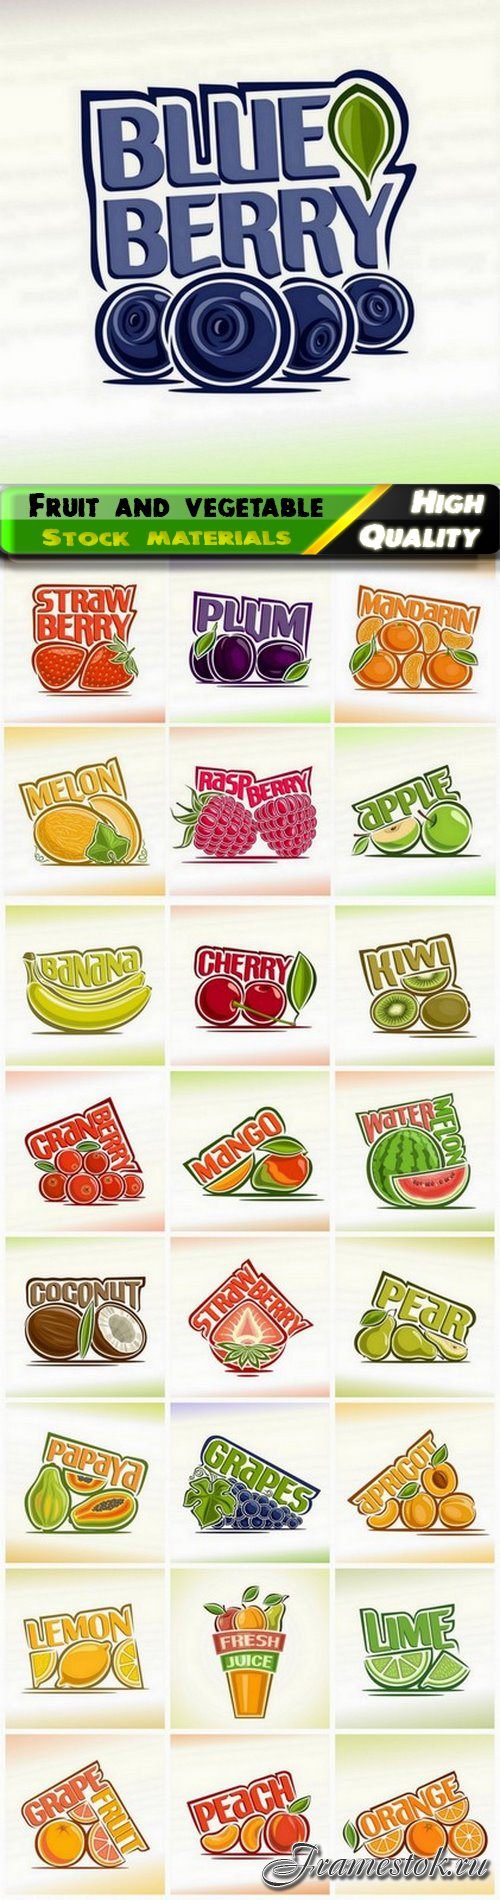 Creative fruit and vegetable illustration healthy food 25 Eps